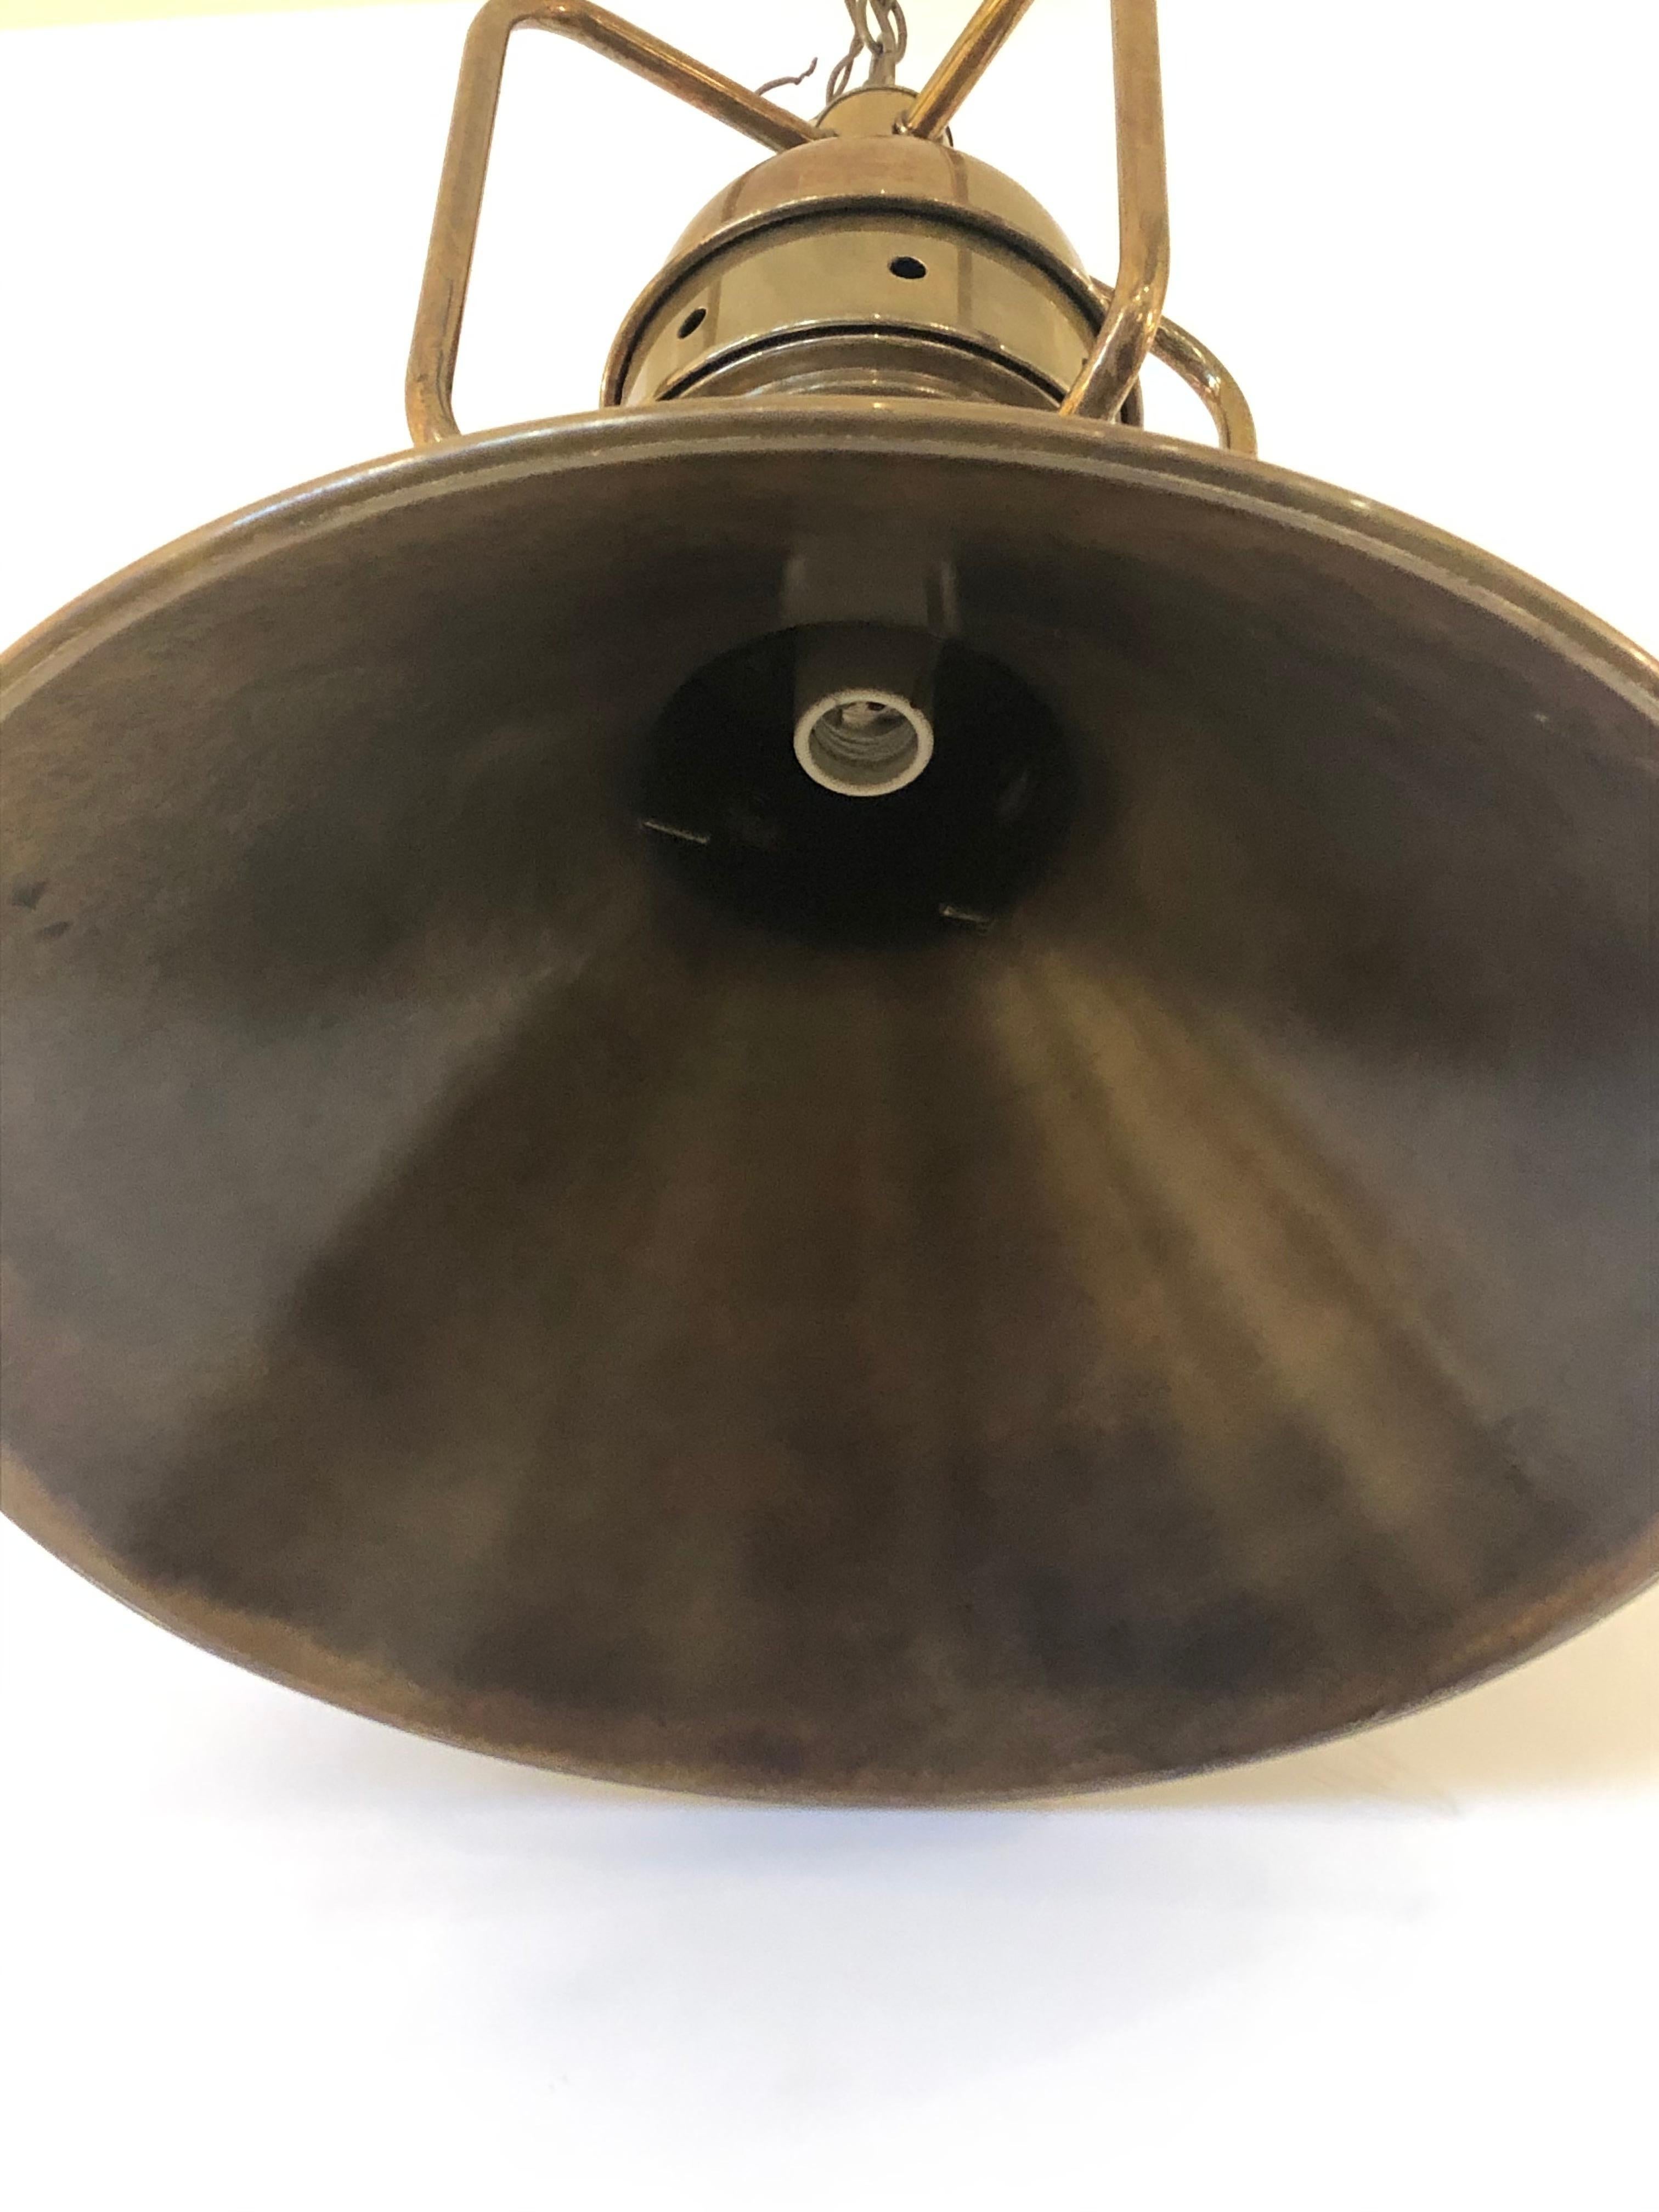 Authentic large brass industrial light fixture having a cool industrial vibe. Original 14